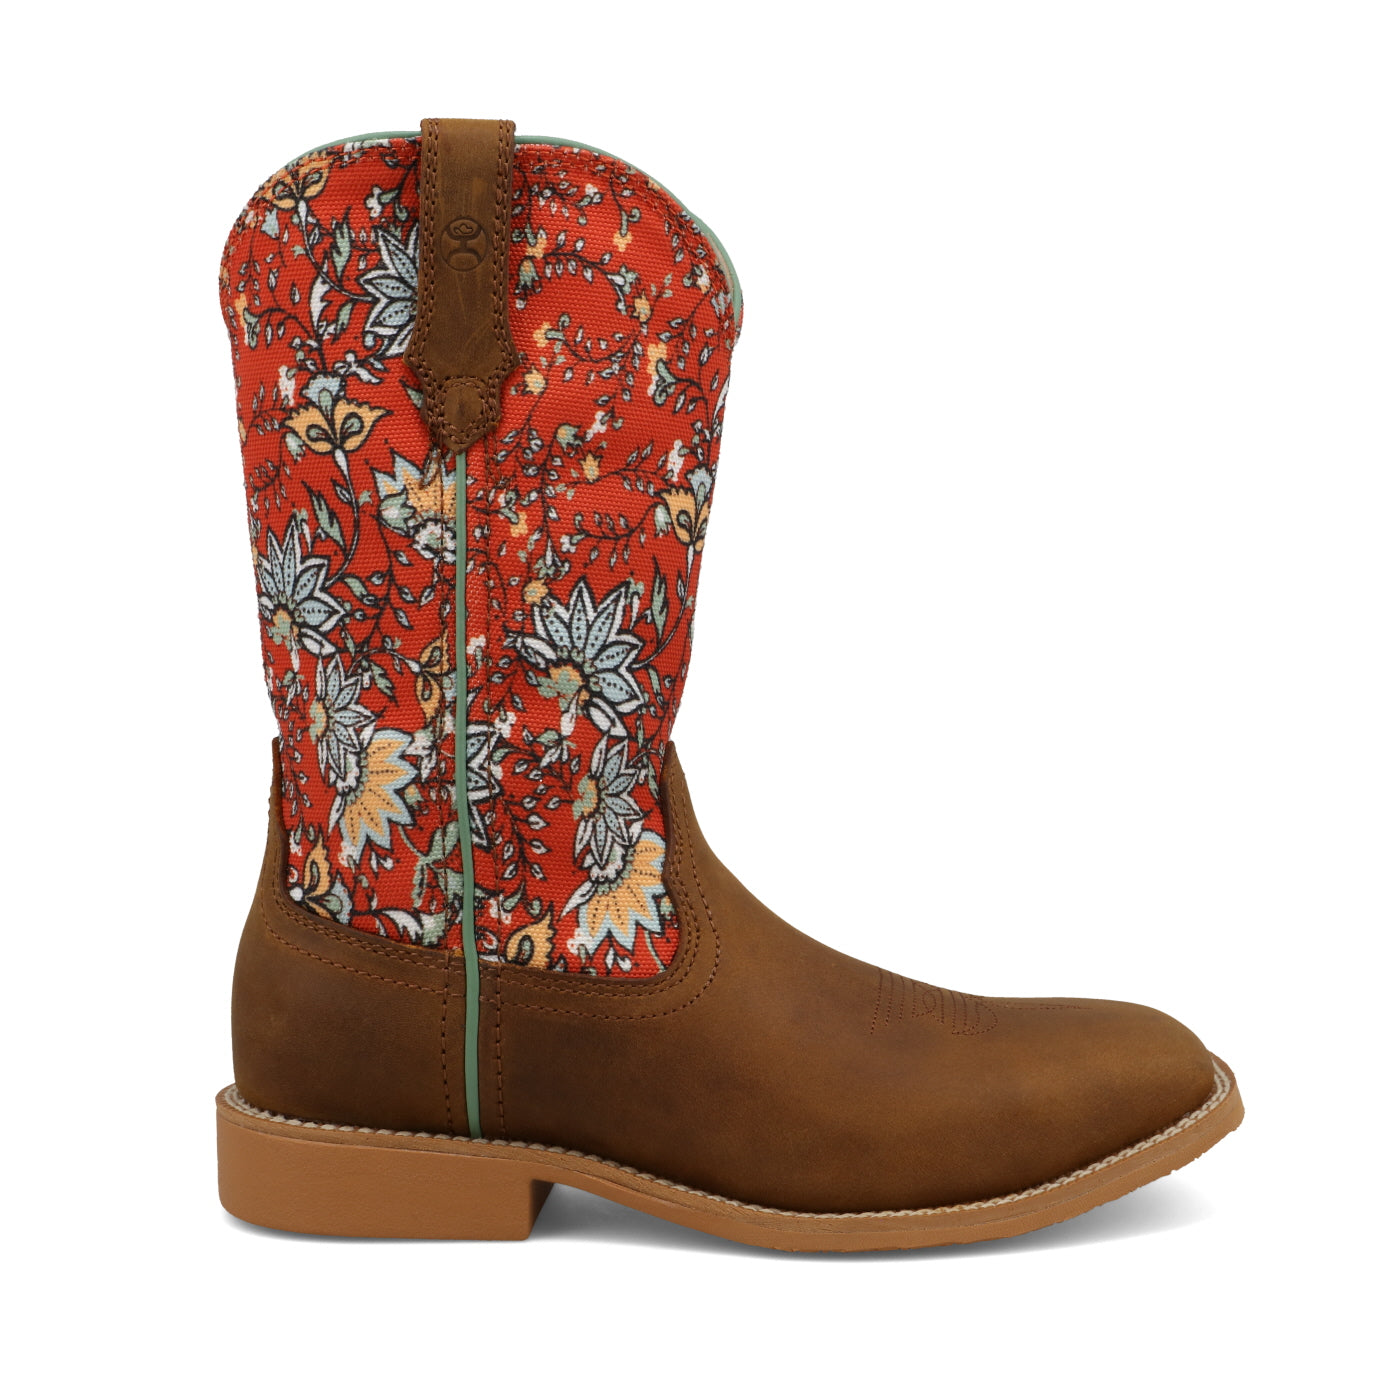 Youth Hooey Boot - Rustic Brown & Red Floral